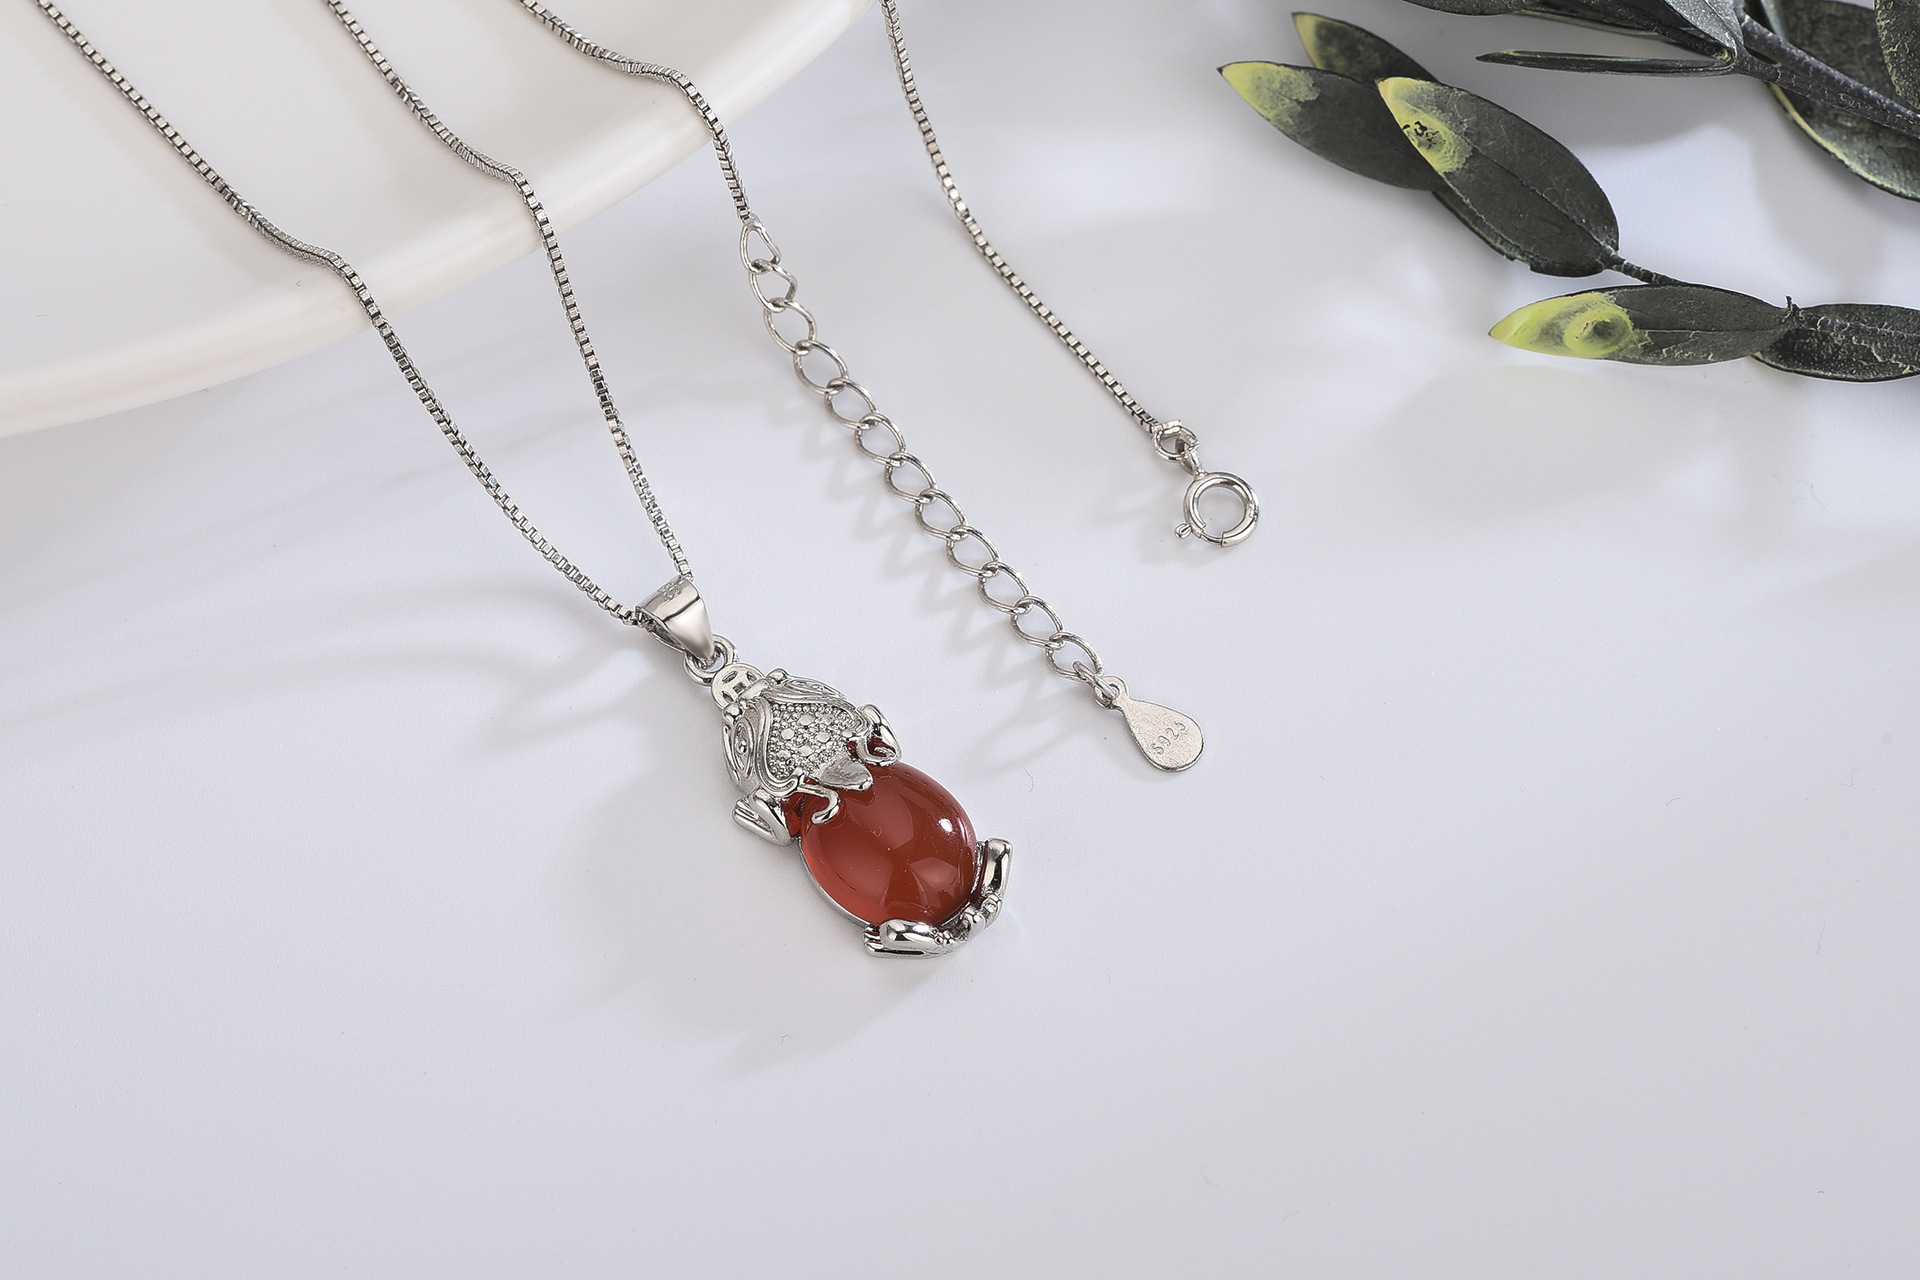 10x12mm pendant (including stone, with O-chain)